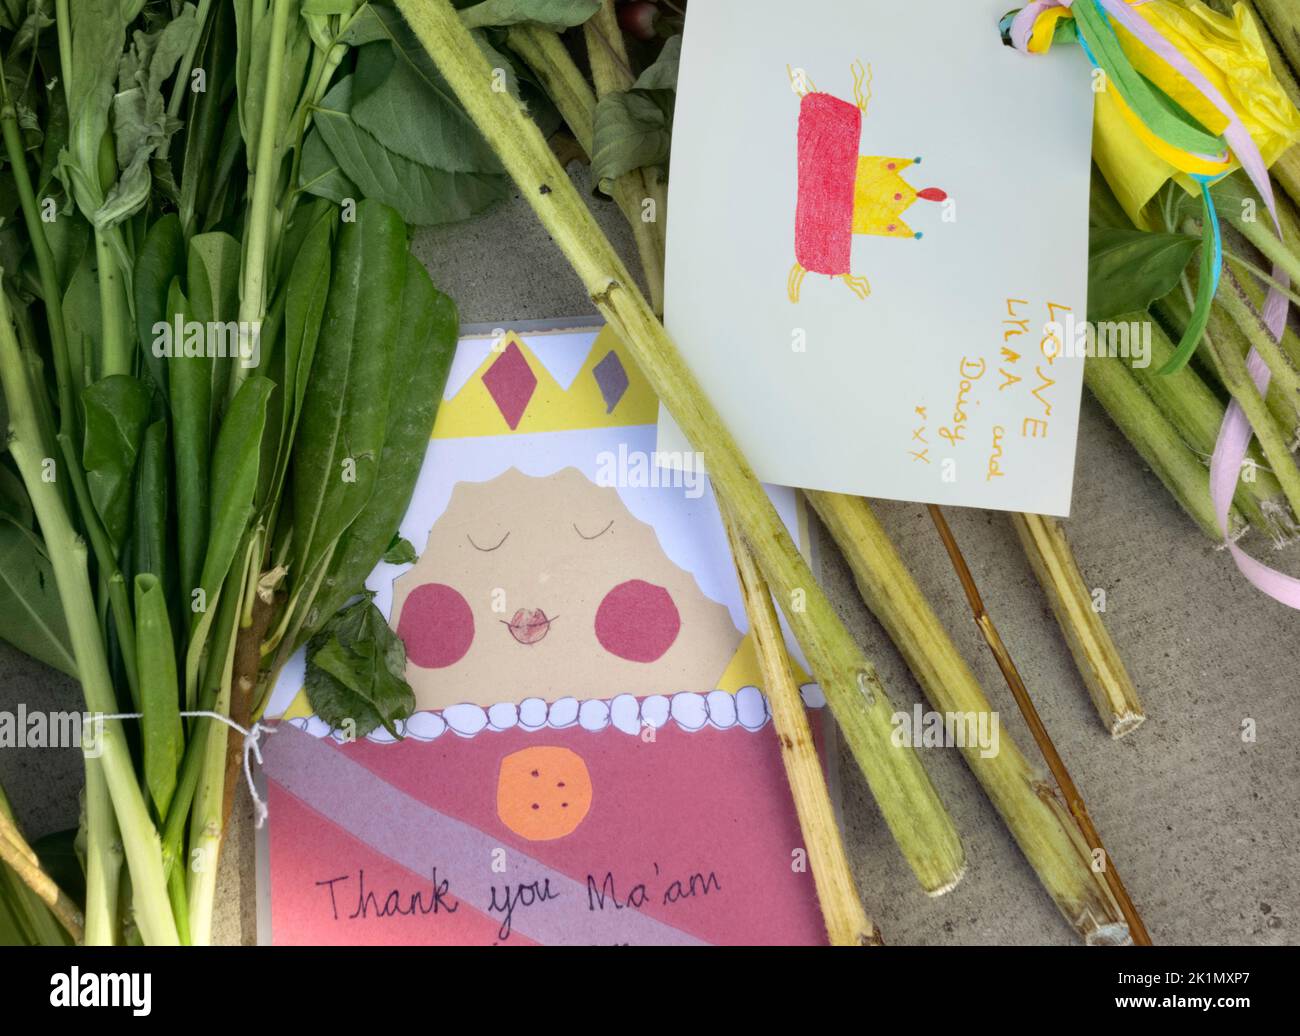 Floral tributes and messages by children at St. Albans Cathedral, Hertfordshire UK on the death of Queen Elizabeth II Stock Photo